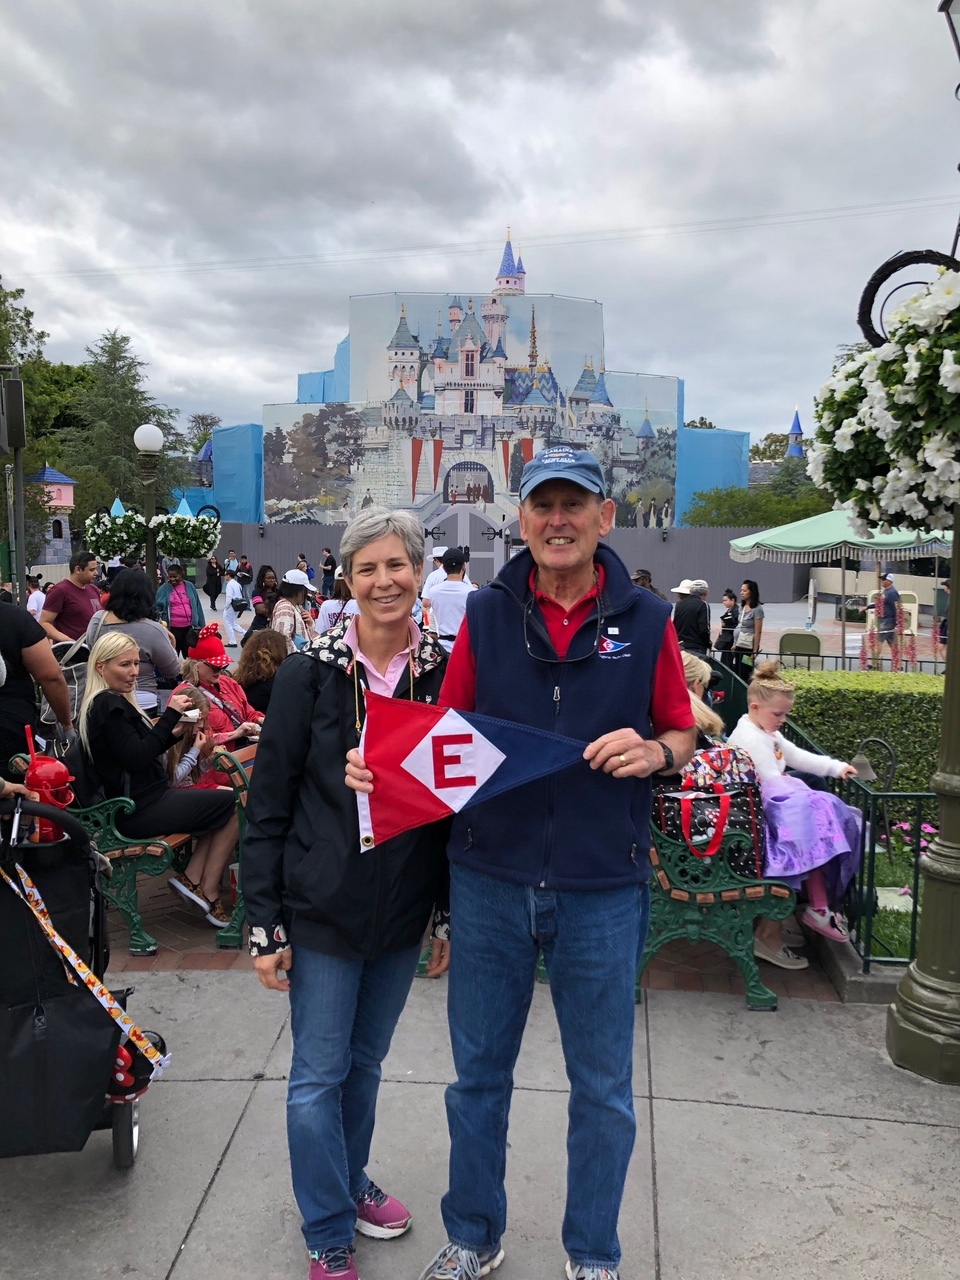  Gary and Jane show their pride at the happiest place on earth—Disneyland! 